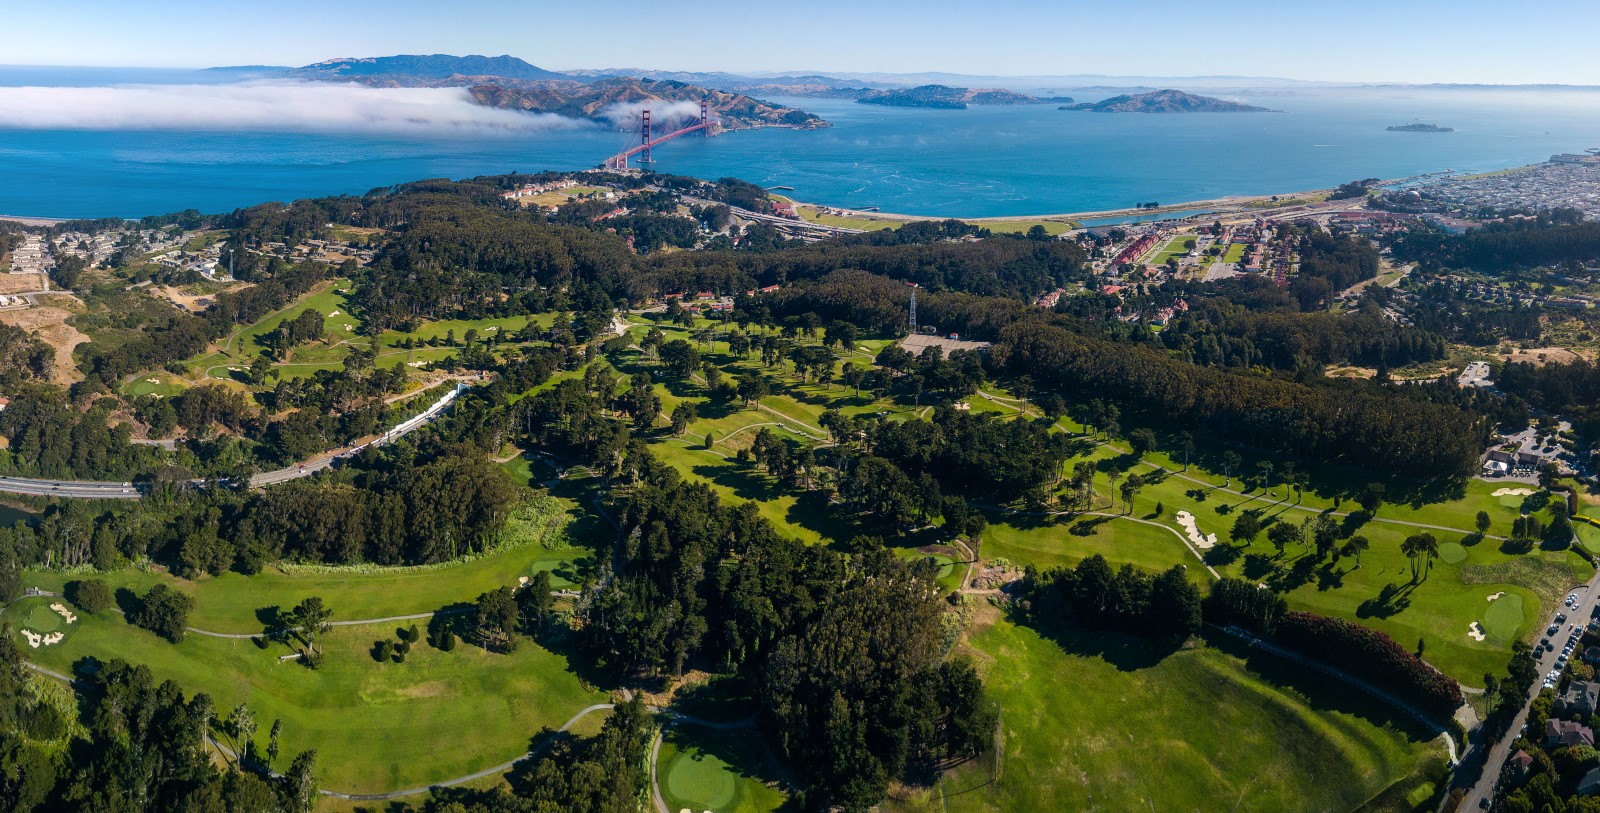 Image of Presidio Golf Course Aerial View, The Lodge at the Presidio, 1894, Member of Historic Hotels of America, in San Francisco, California, Golf